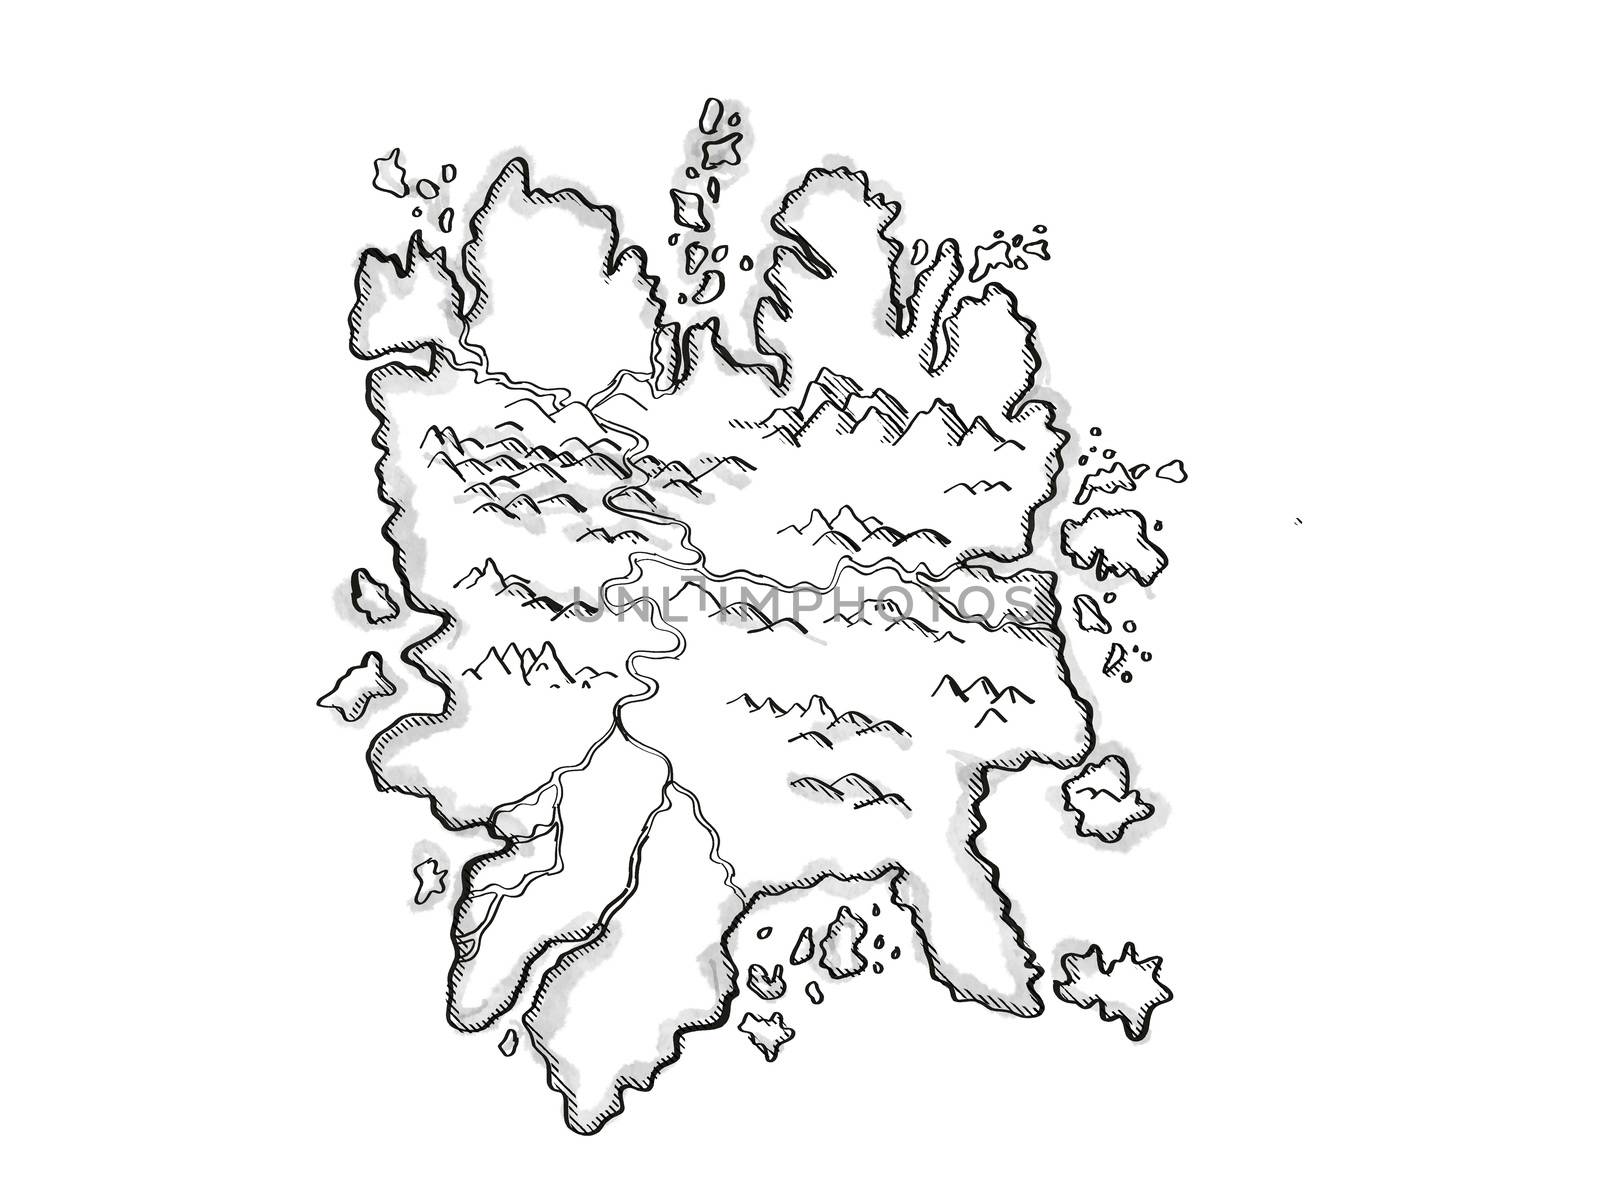 Retro cartoon style drawing of a vintage fantasy or treasure map showing an Island With Mountains and Rivers on isolated white background done in black and white.